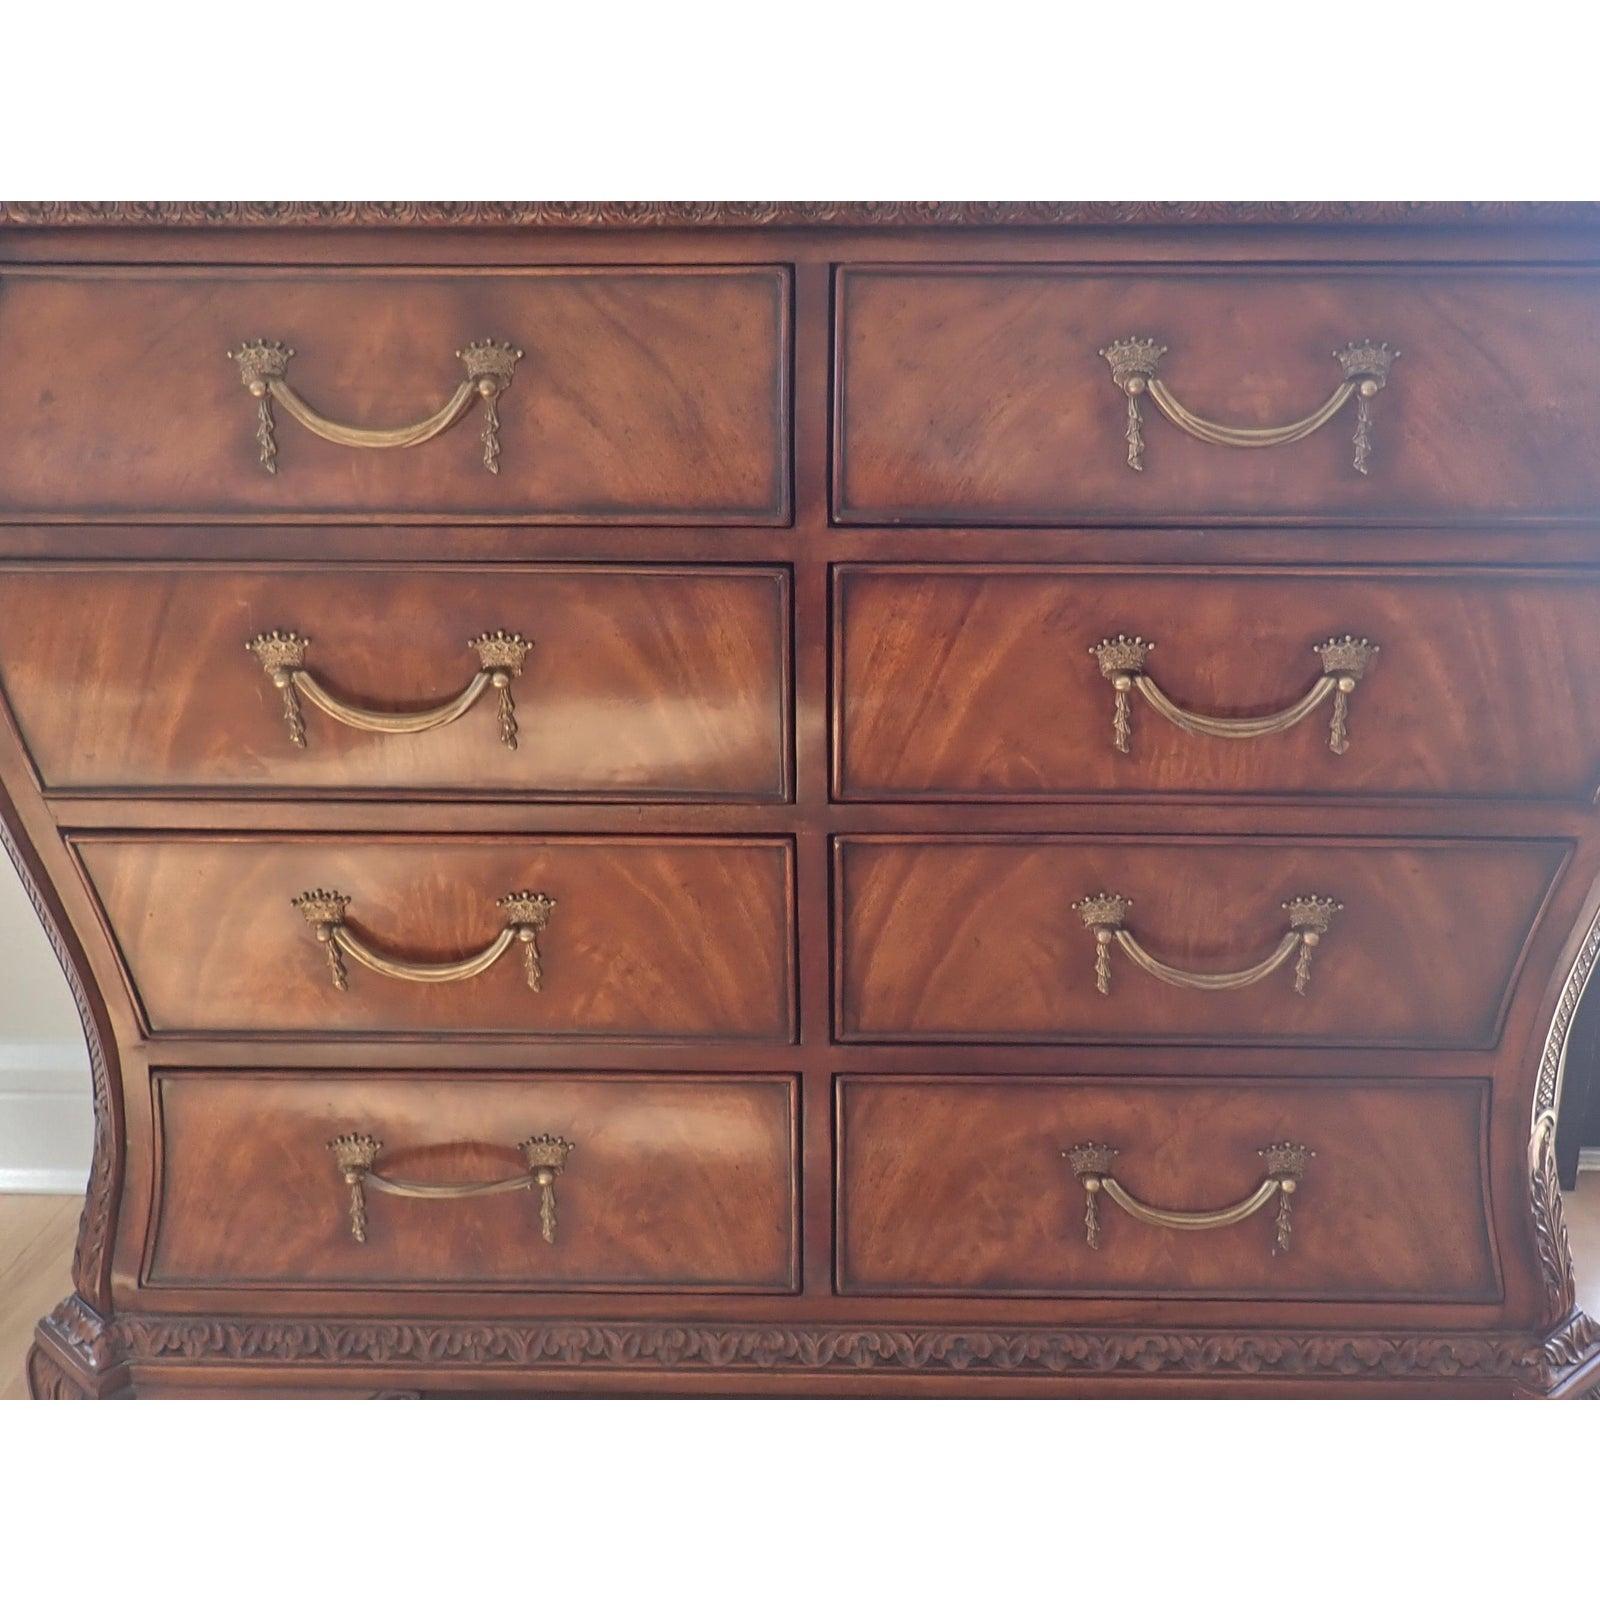 Theodore Alexander Bombay Front Chest from the Althorp Living History furniture collection. Great quality Bombay form commode. Makers plaque and mark inside top draw. Carved and veneered walnut.


